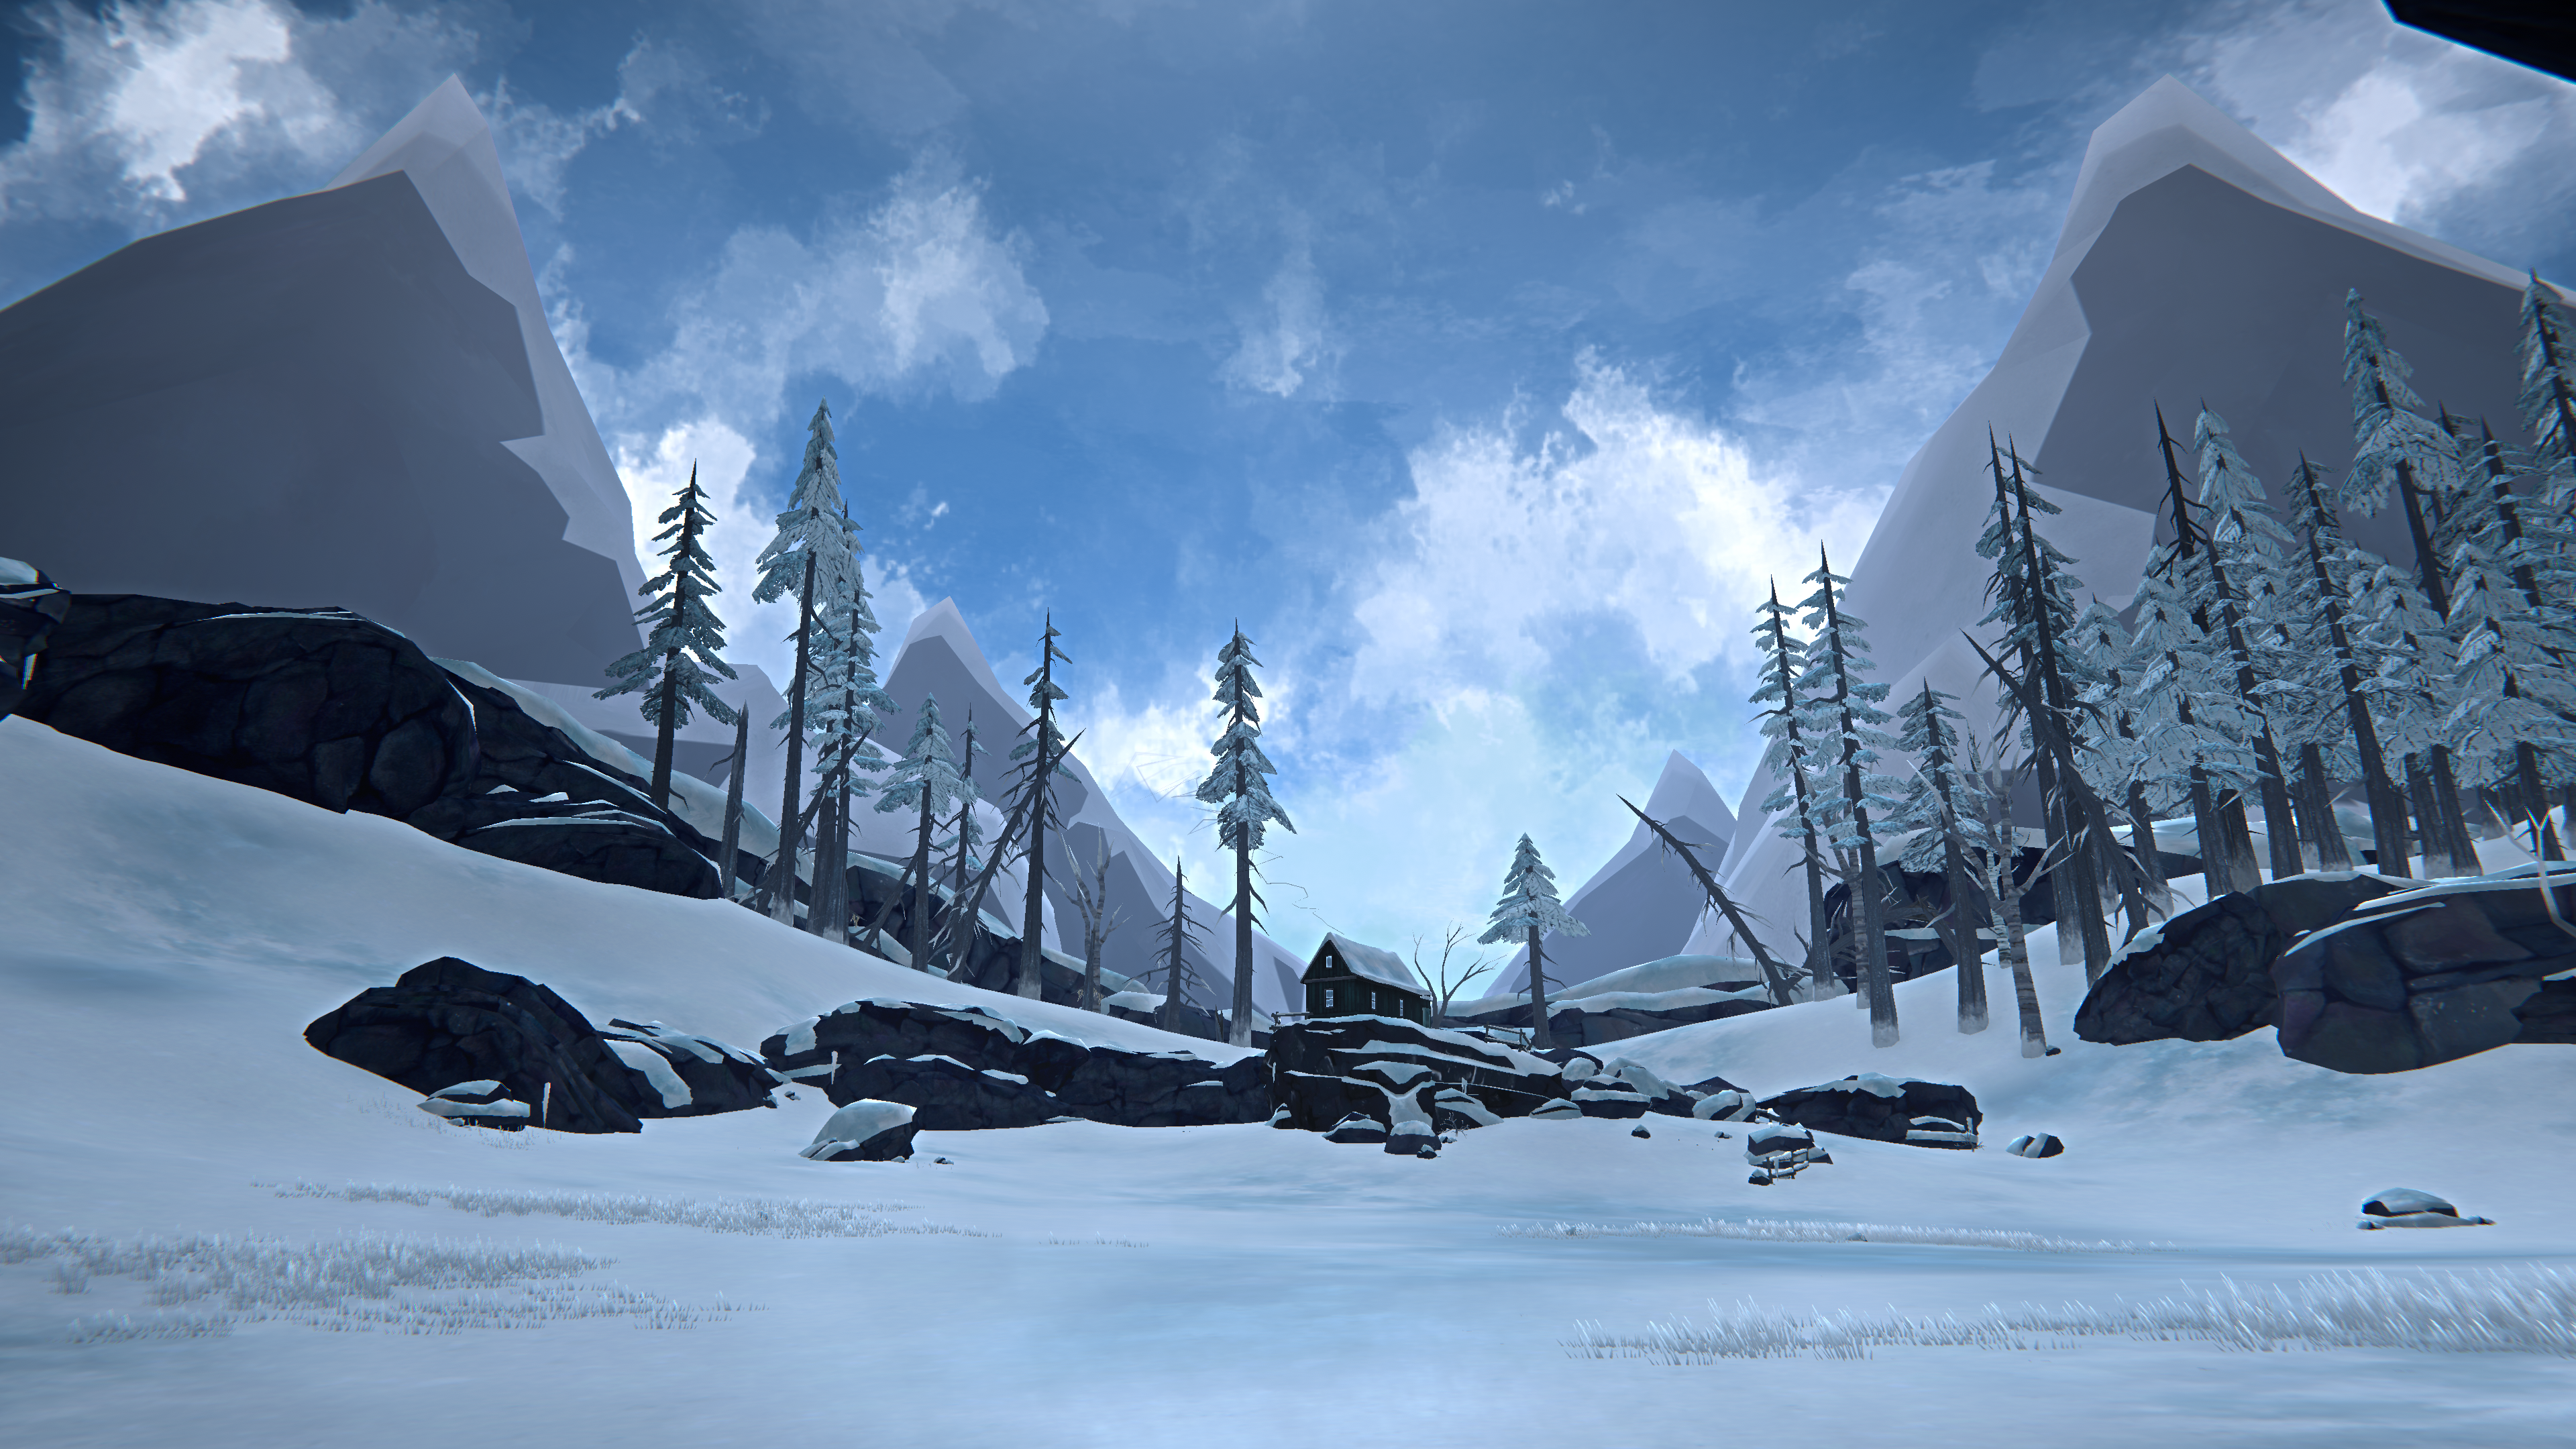 General 3840x2160 video game landscape video games screen shot The Long Dark snow PC gaming survival video game art mountains